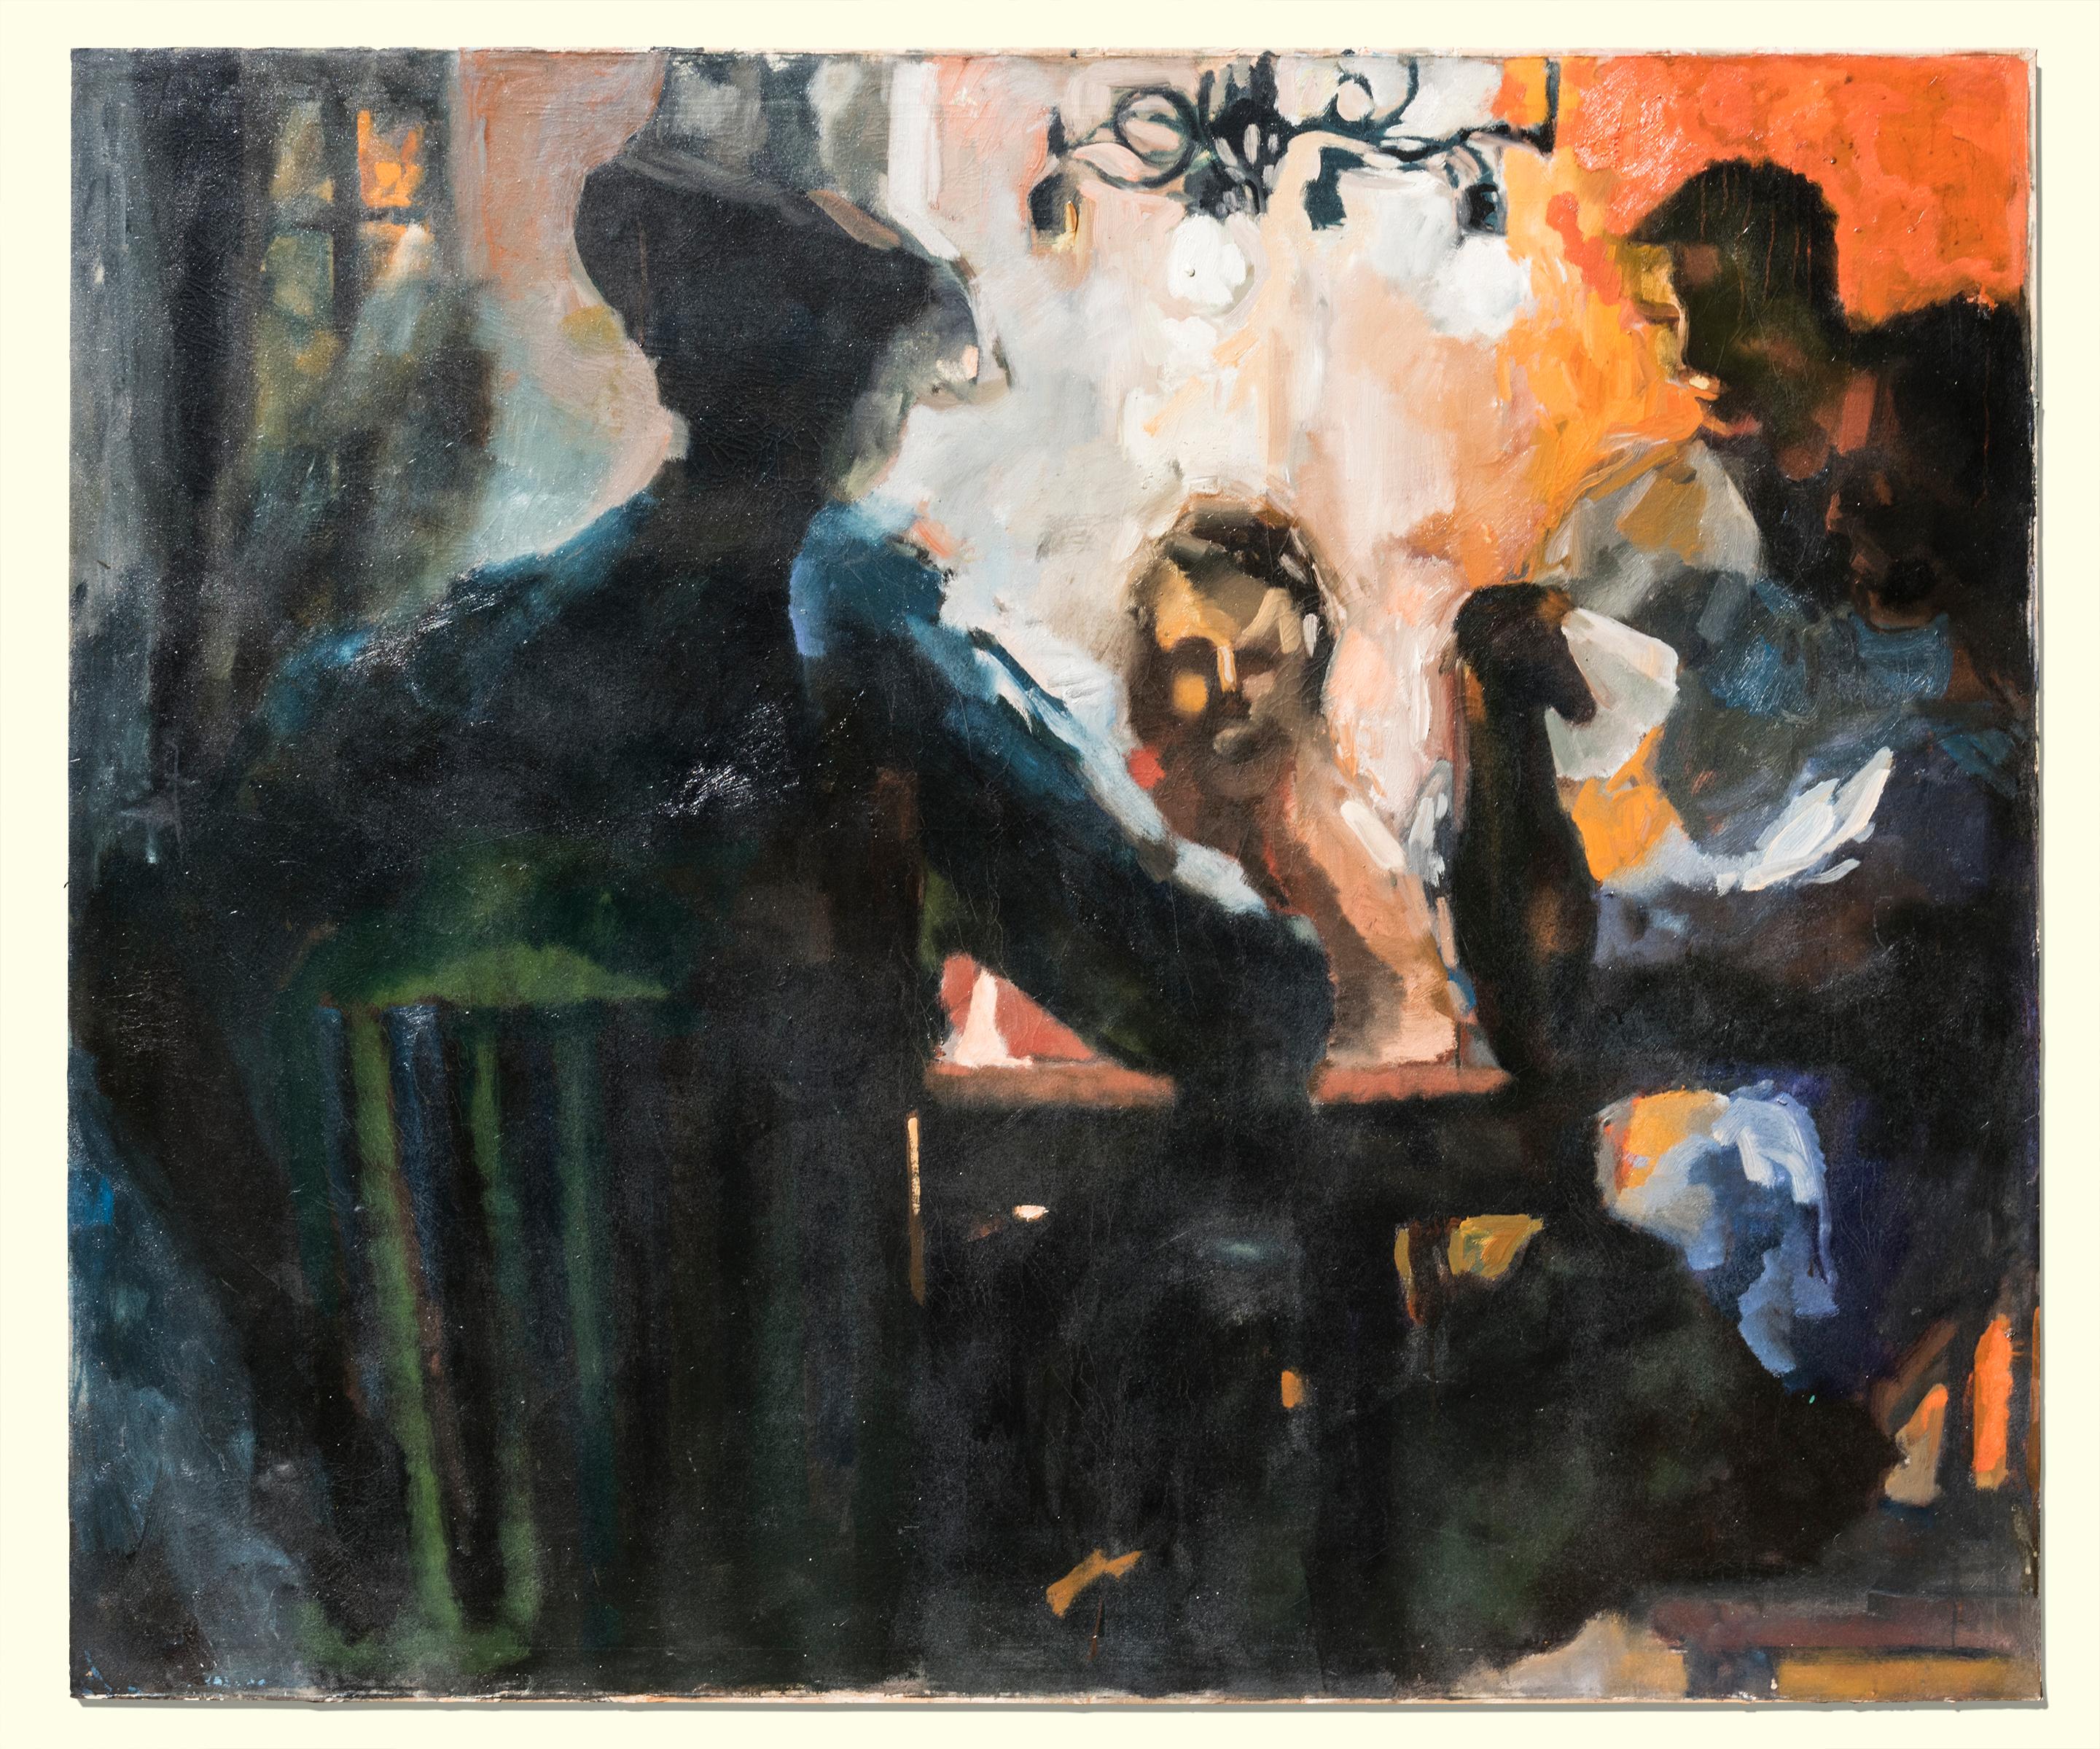 Alvin Demar Loving Interior Painting - "The Card Players" Interior Scene, Card Players, African-American, Intense Color